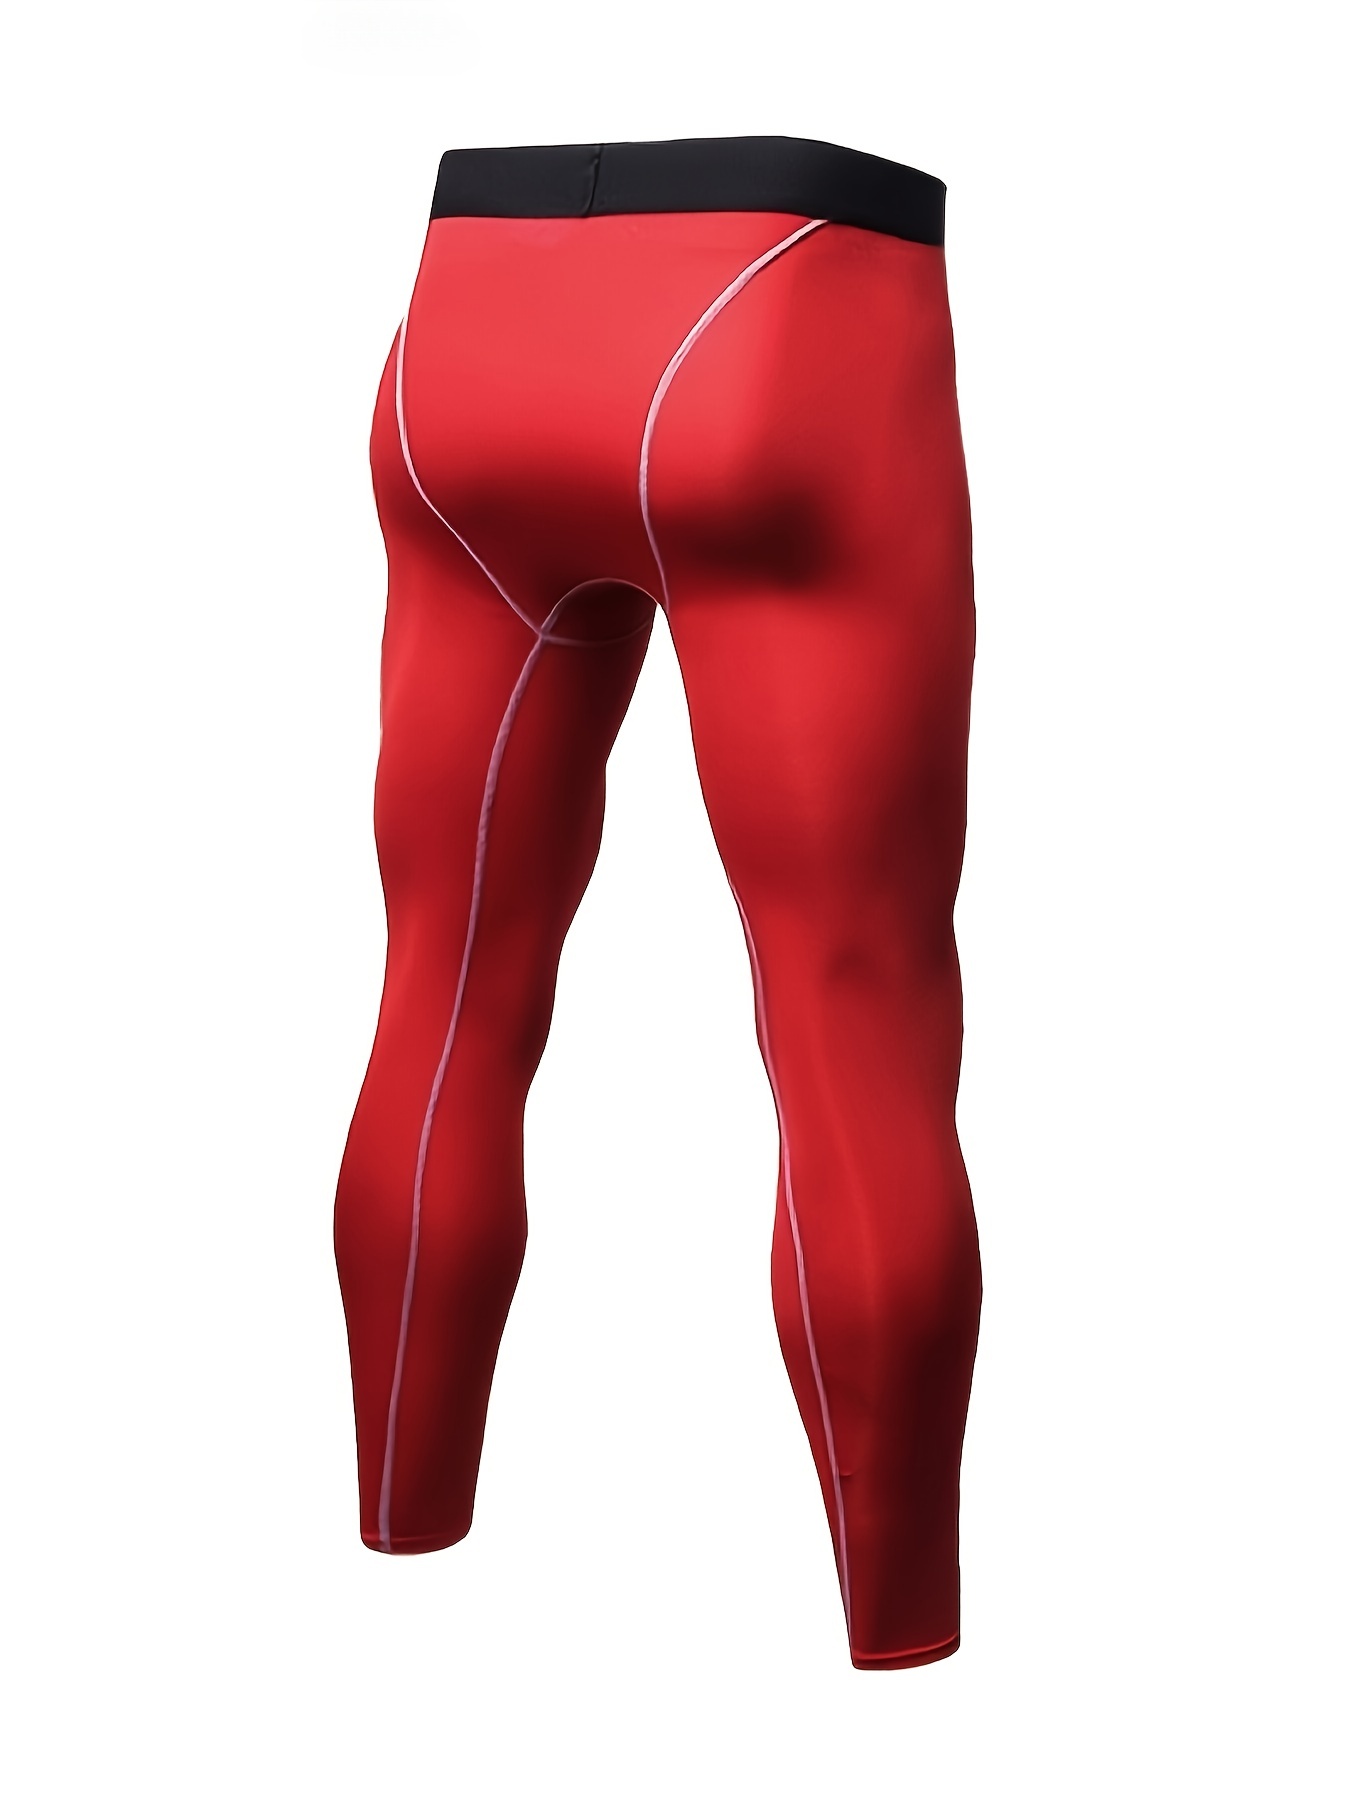  3 Pack Mens Compression Pants Athletic Red Leggings Pockets  Sports Baselayer Basketball Cycling Tights Red Active Running Pants